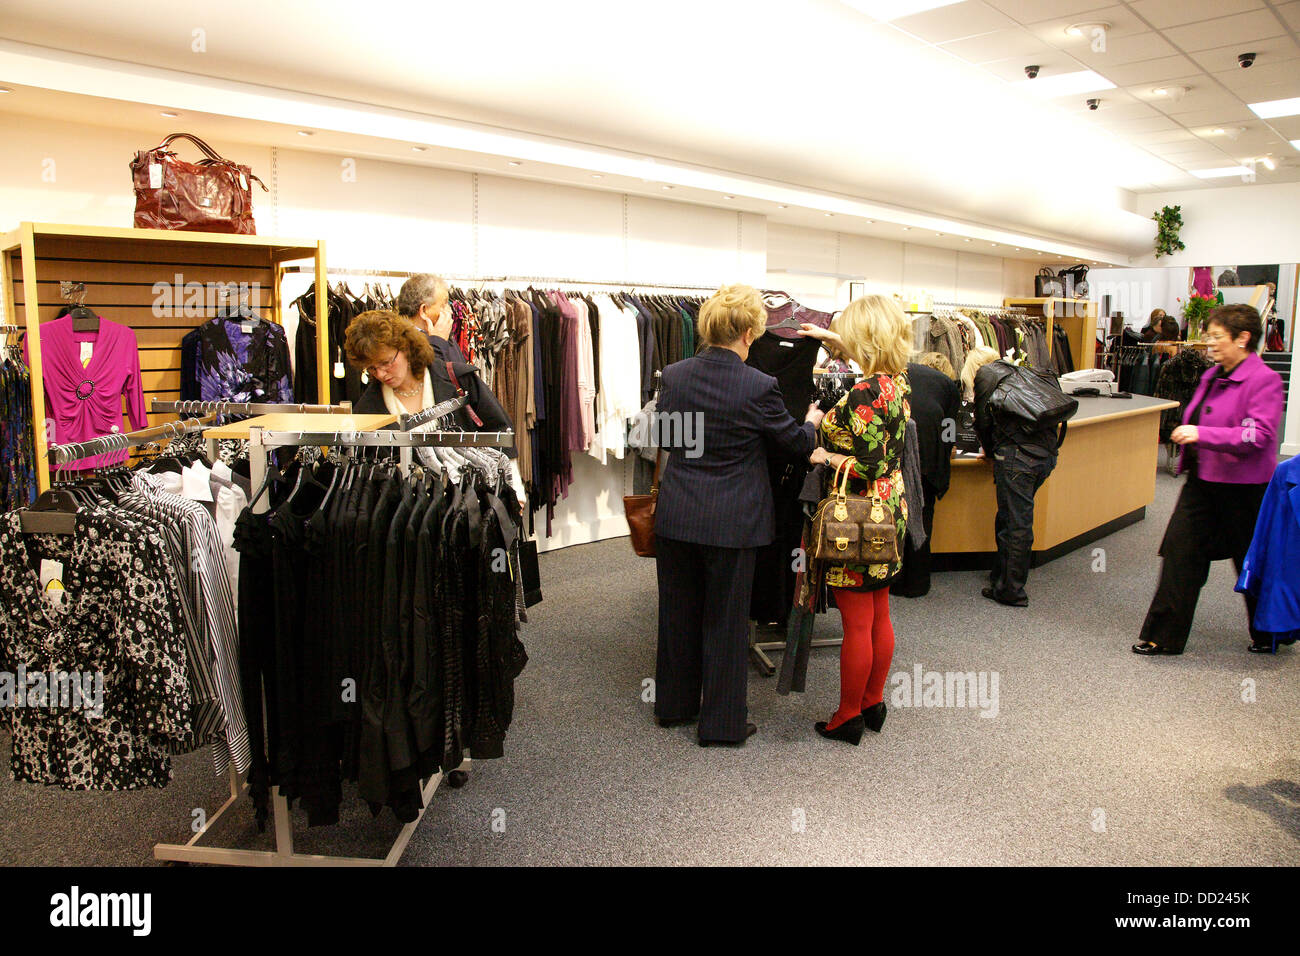 Women shopping for dresses in Clothes Store Stock Photo